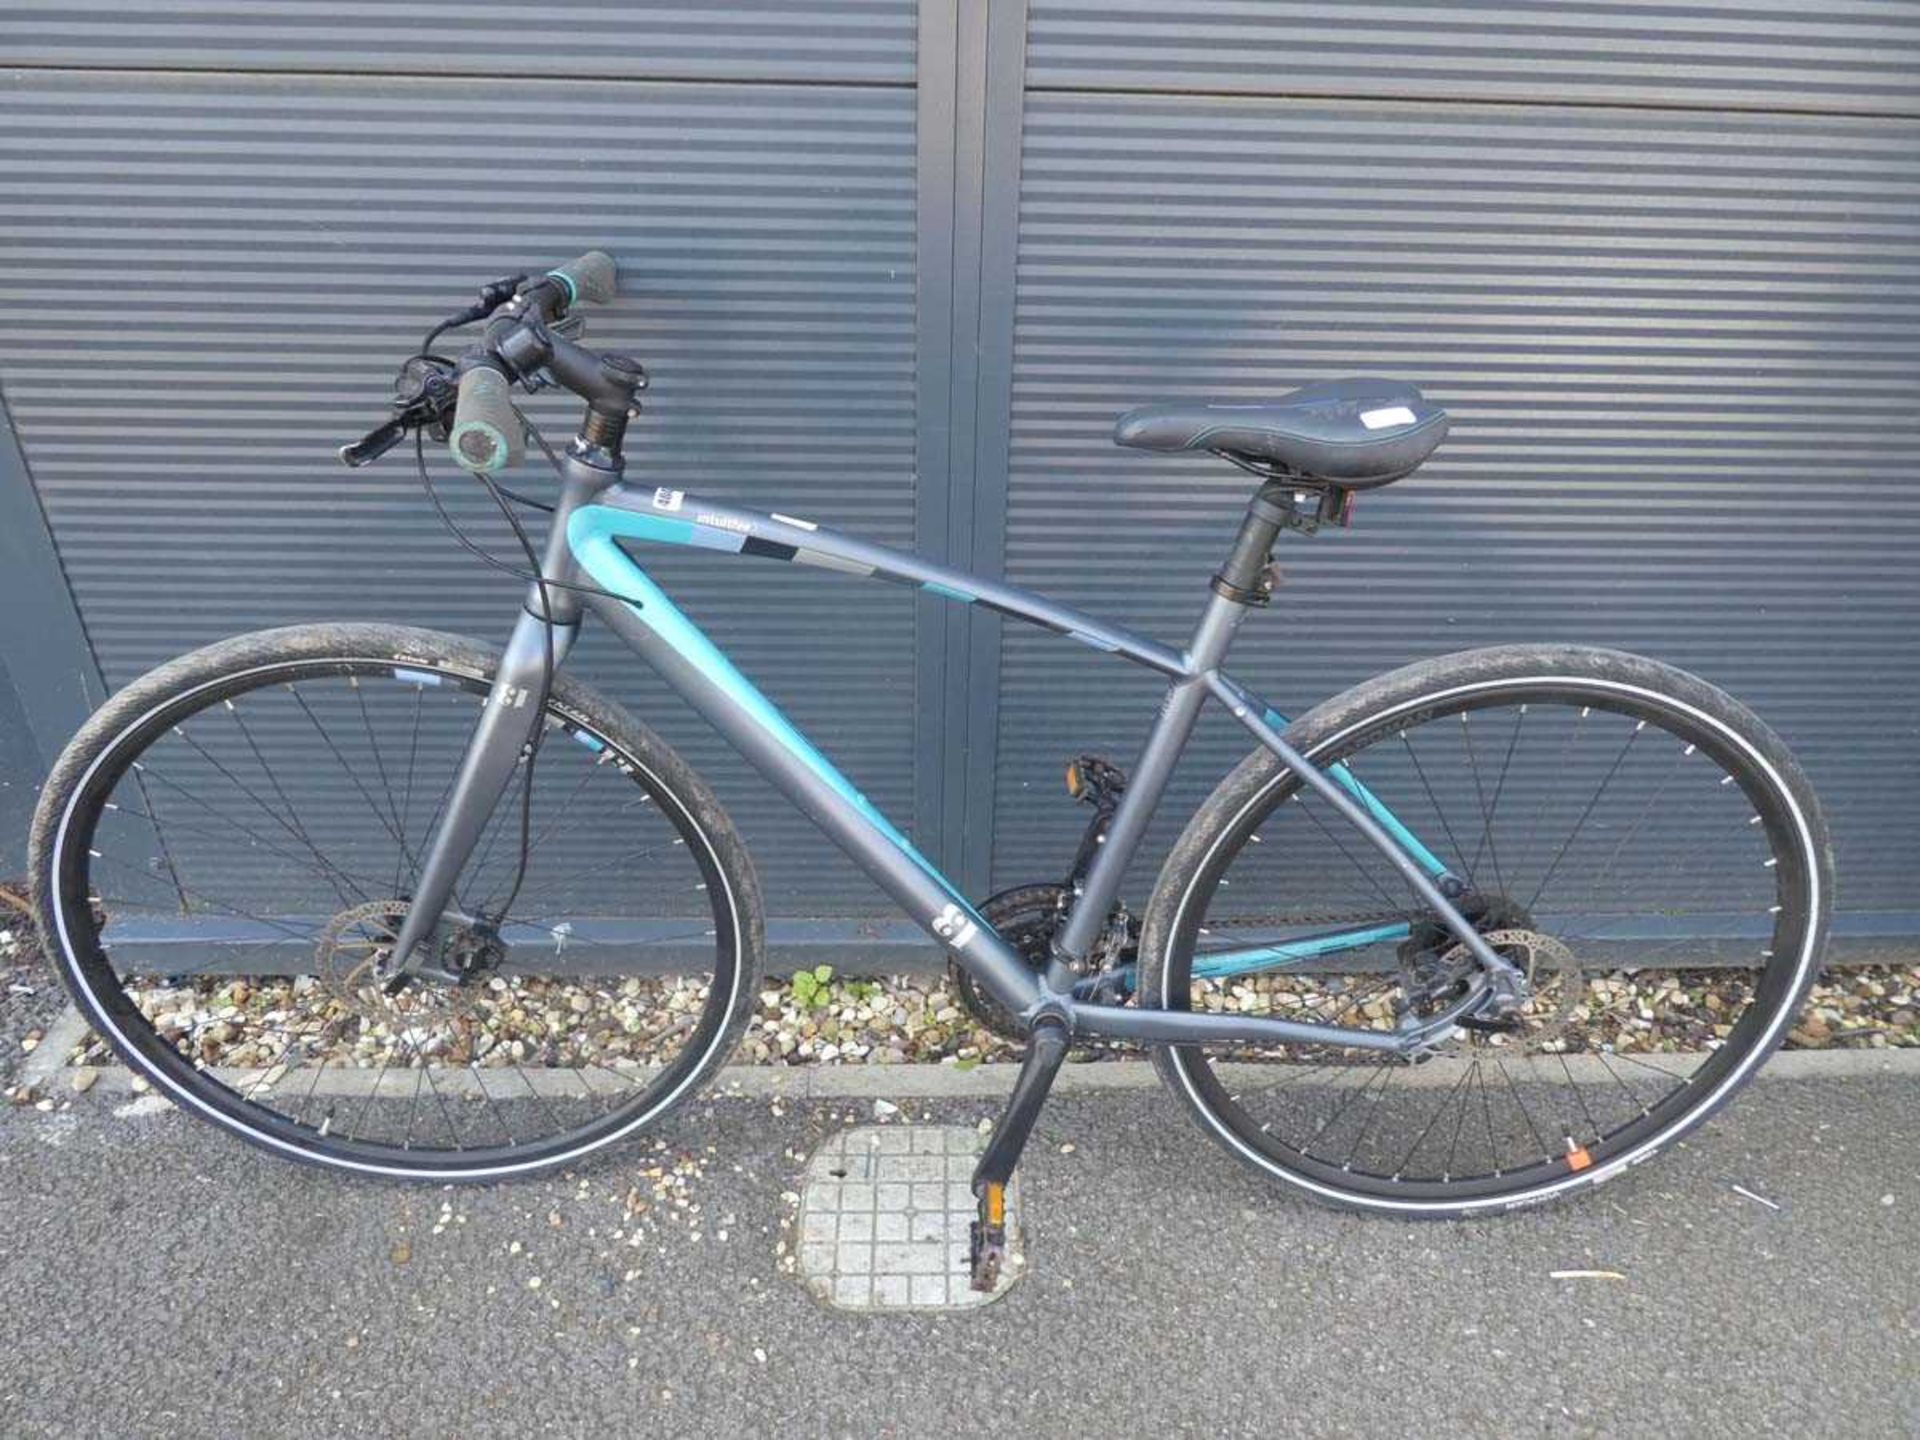 Intuitive grey and blue town bike